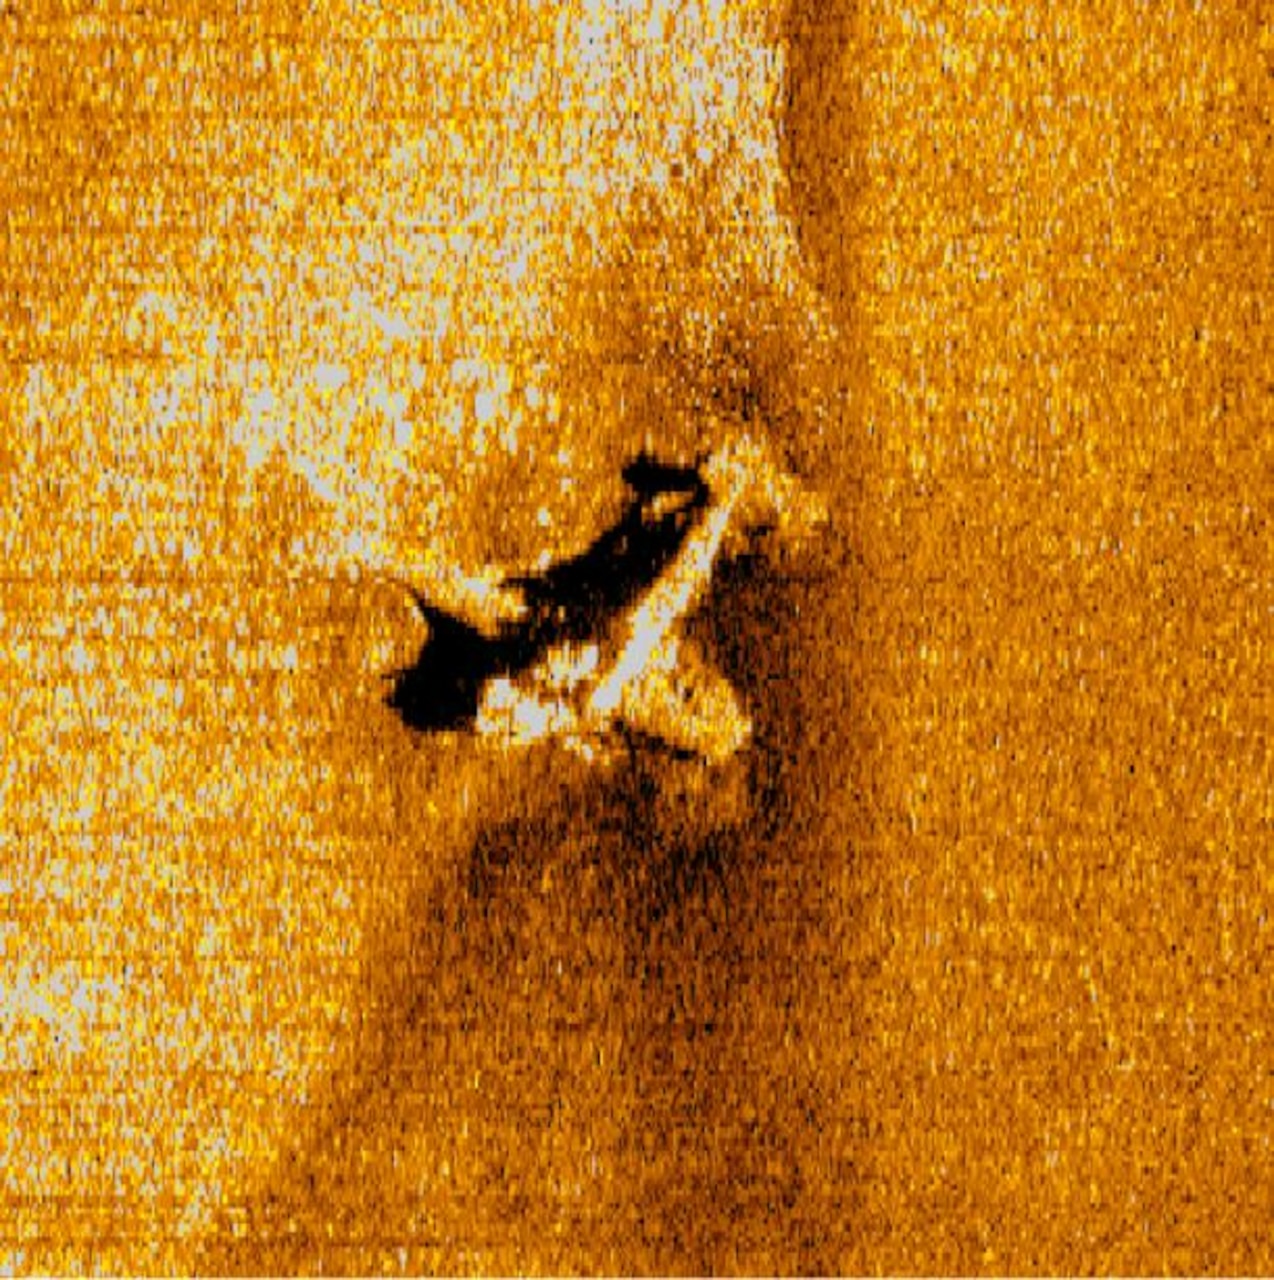 NHHC side scan sonar image of the aircraft on the seafloor.